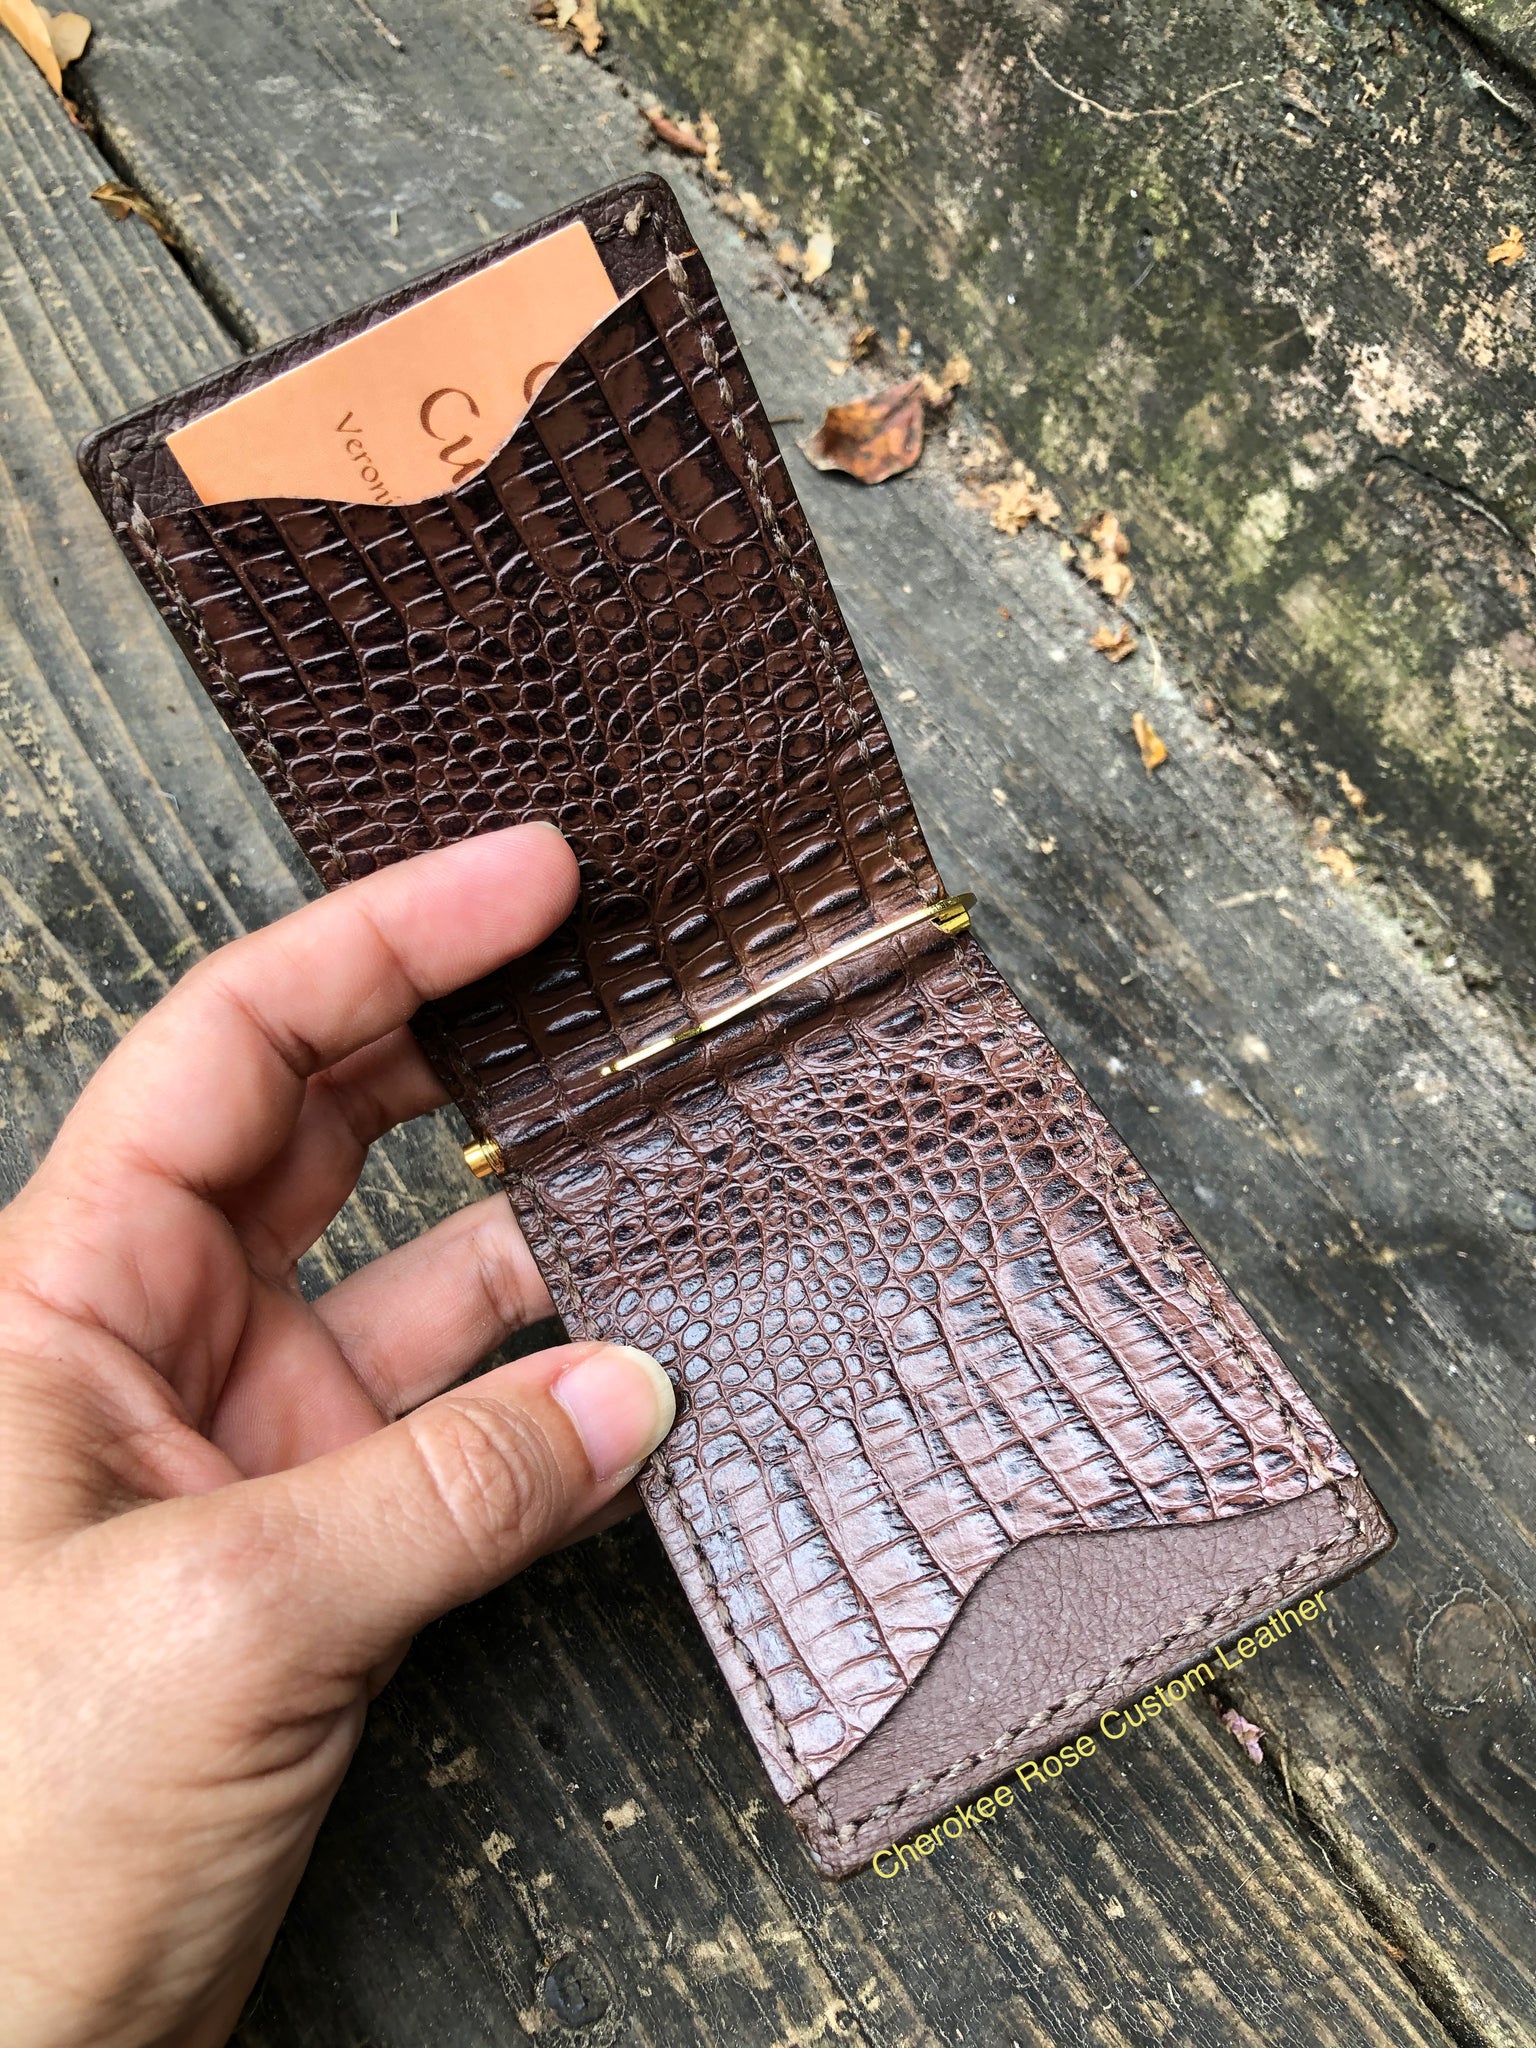 Front Pocket Wallet, Leather Handmade Brown Personalized